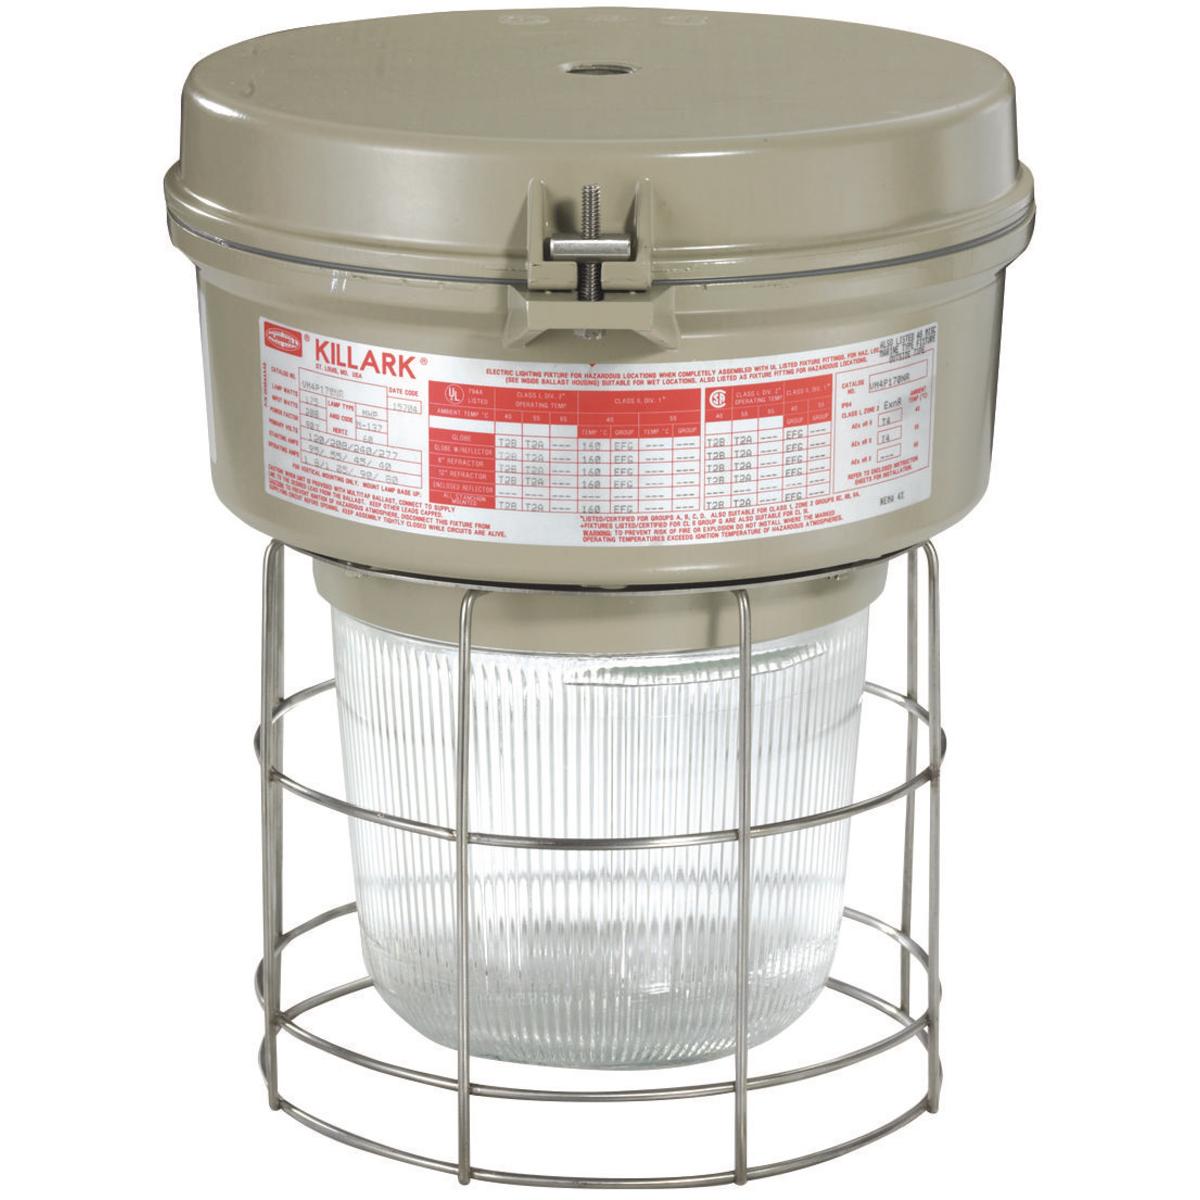 Hubbell VM4H105A2R5G VM4 Series - 100W Metal Halide 480V - 3/4" Pendant - Type V Glass Refractor and Guard  ; Ballast tank and splice box – corrosion resistant copper-free aluminum alloy with baked powder epoxy/polyester finish, electrostatically applied for complete, uniform